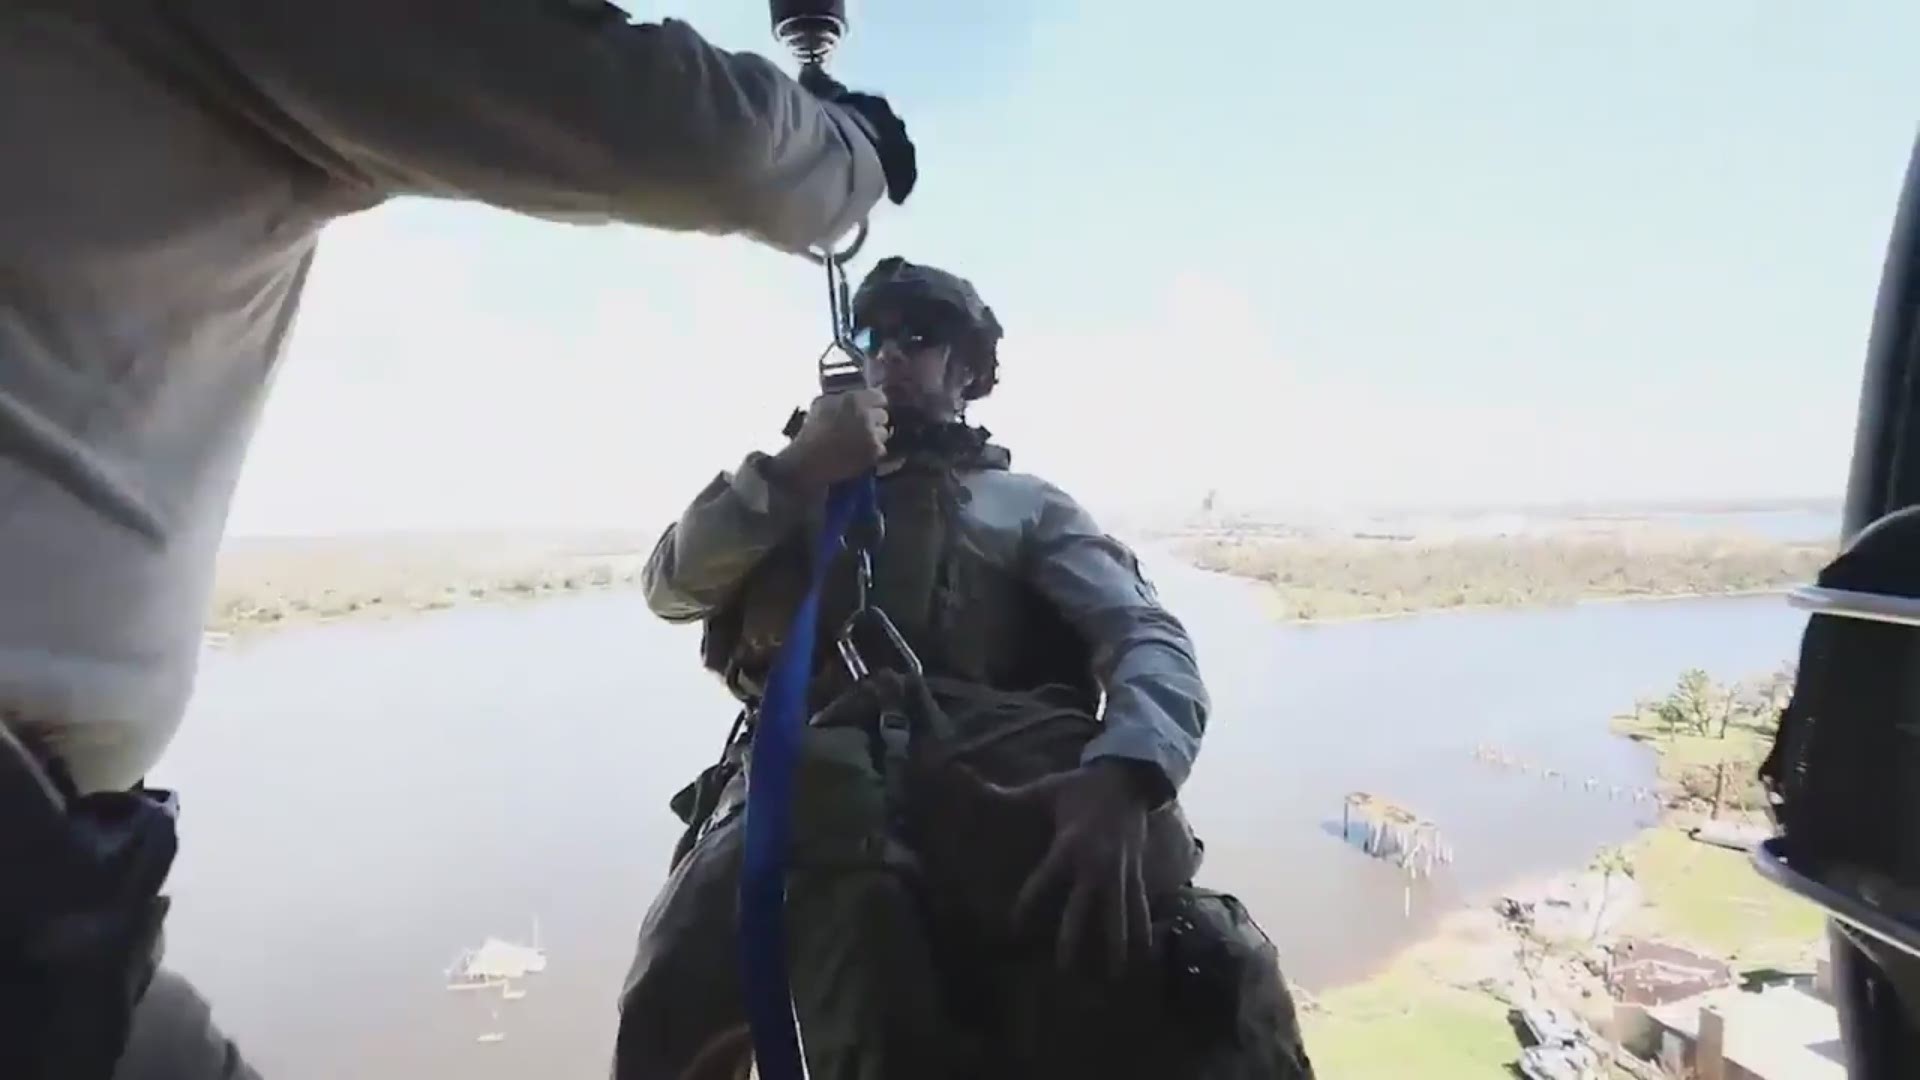 In an incredible video shared on Twitter, a Jacksonville AMO Black Hawk aircrew rescued two people from their inaccessible neighborhoods.